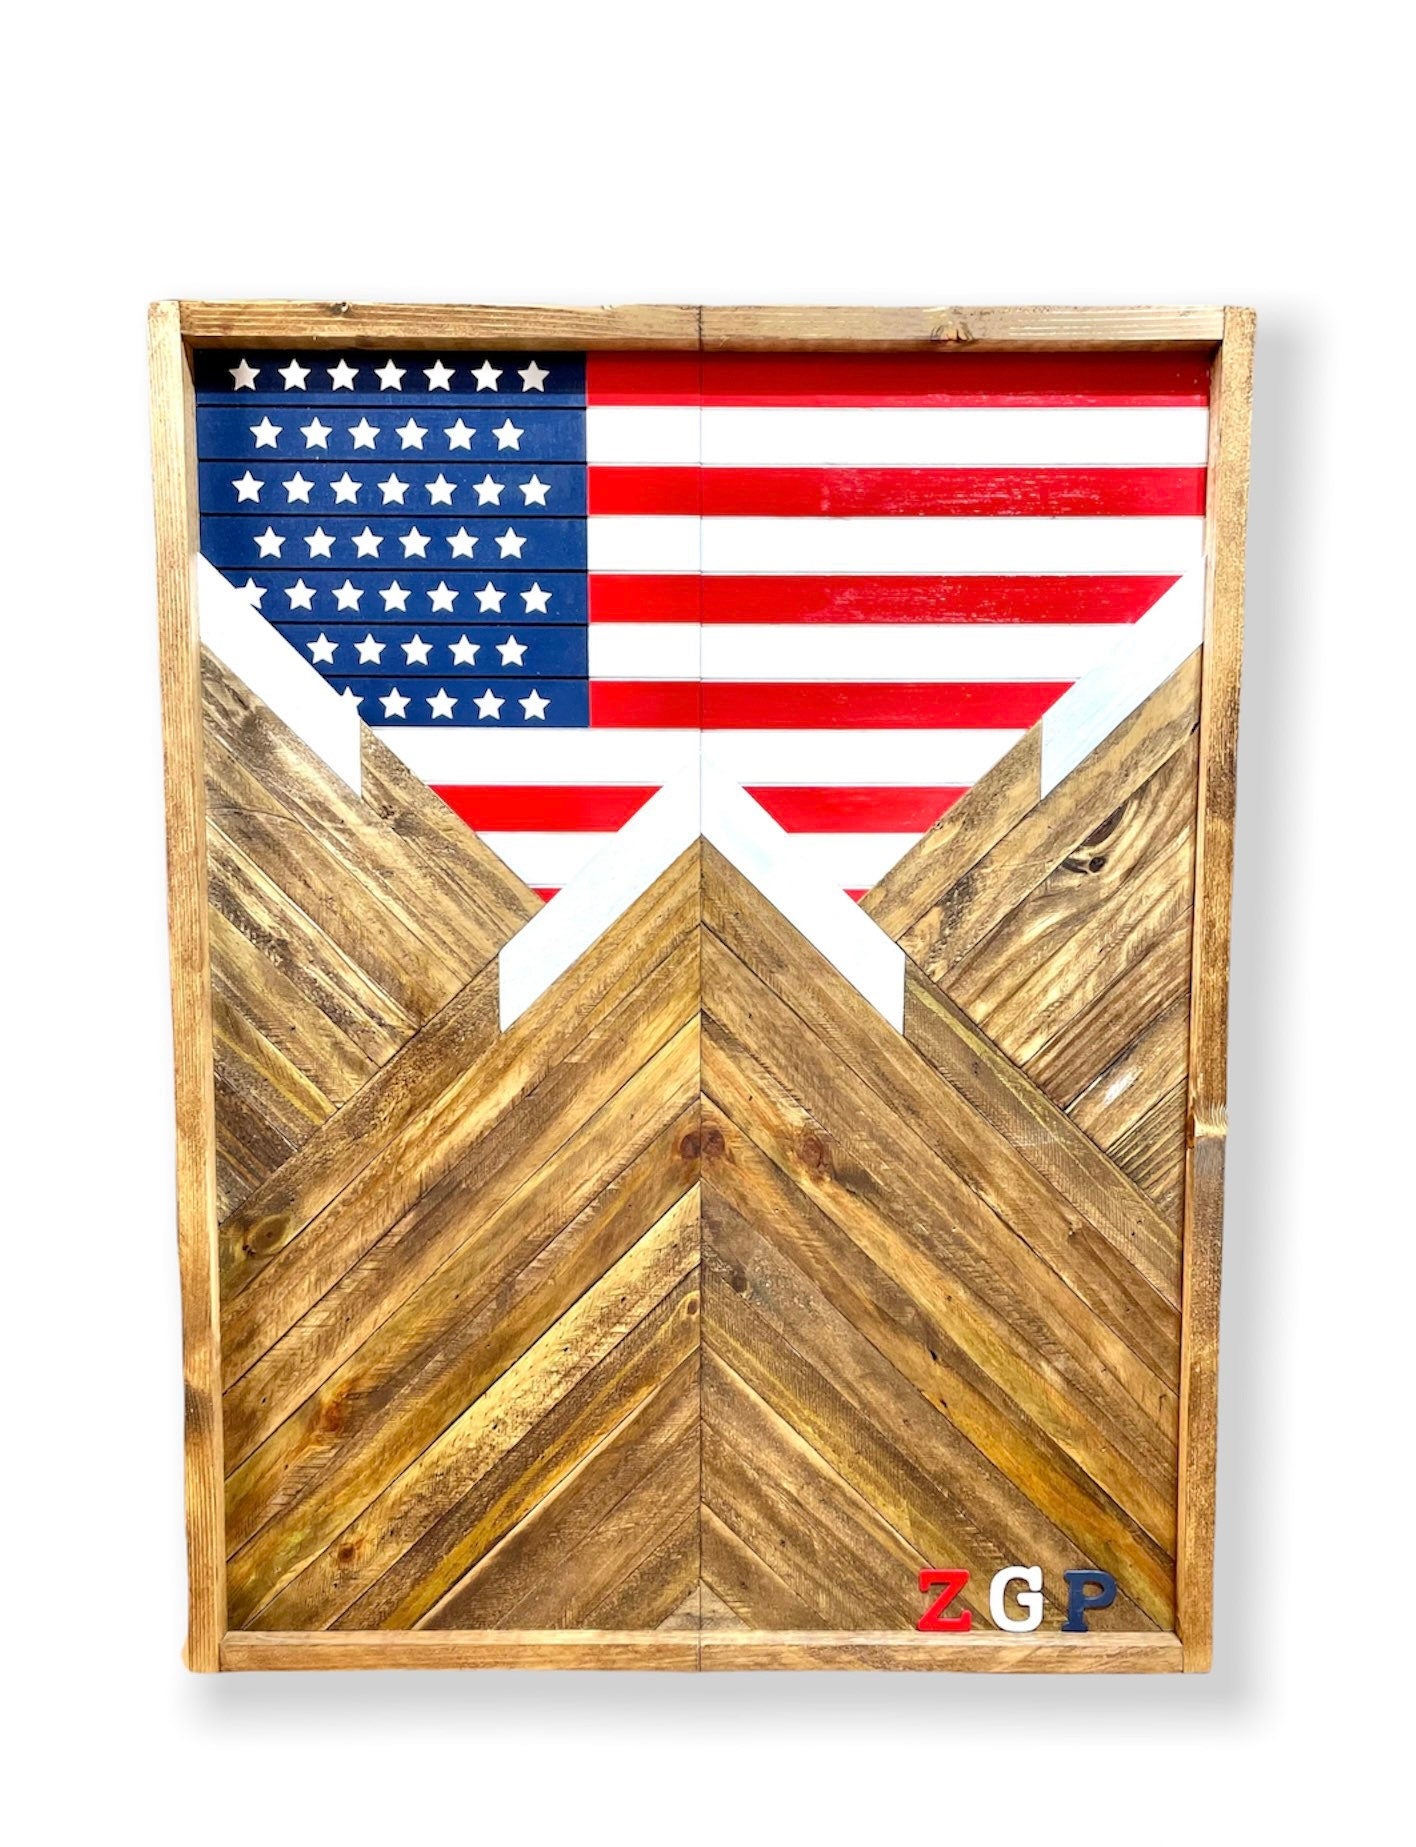 Rustic Electronic Dartboard Cabinet - American-Flag- USA Flag - Rustic Cabinet - 33” x 26” - Game Room / Man Cave Art - Wall Decor